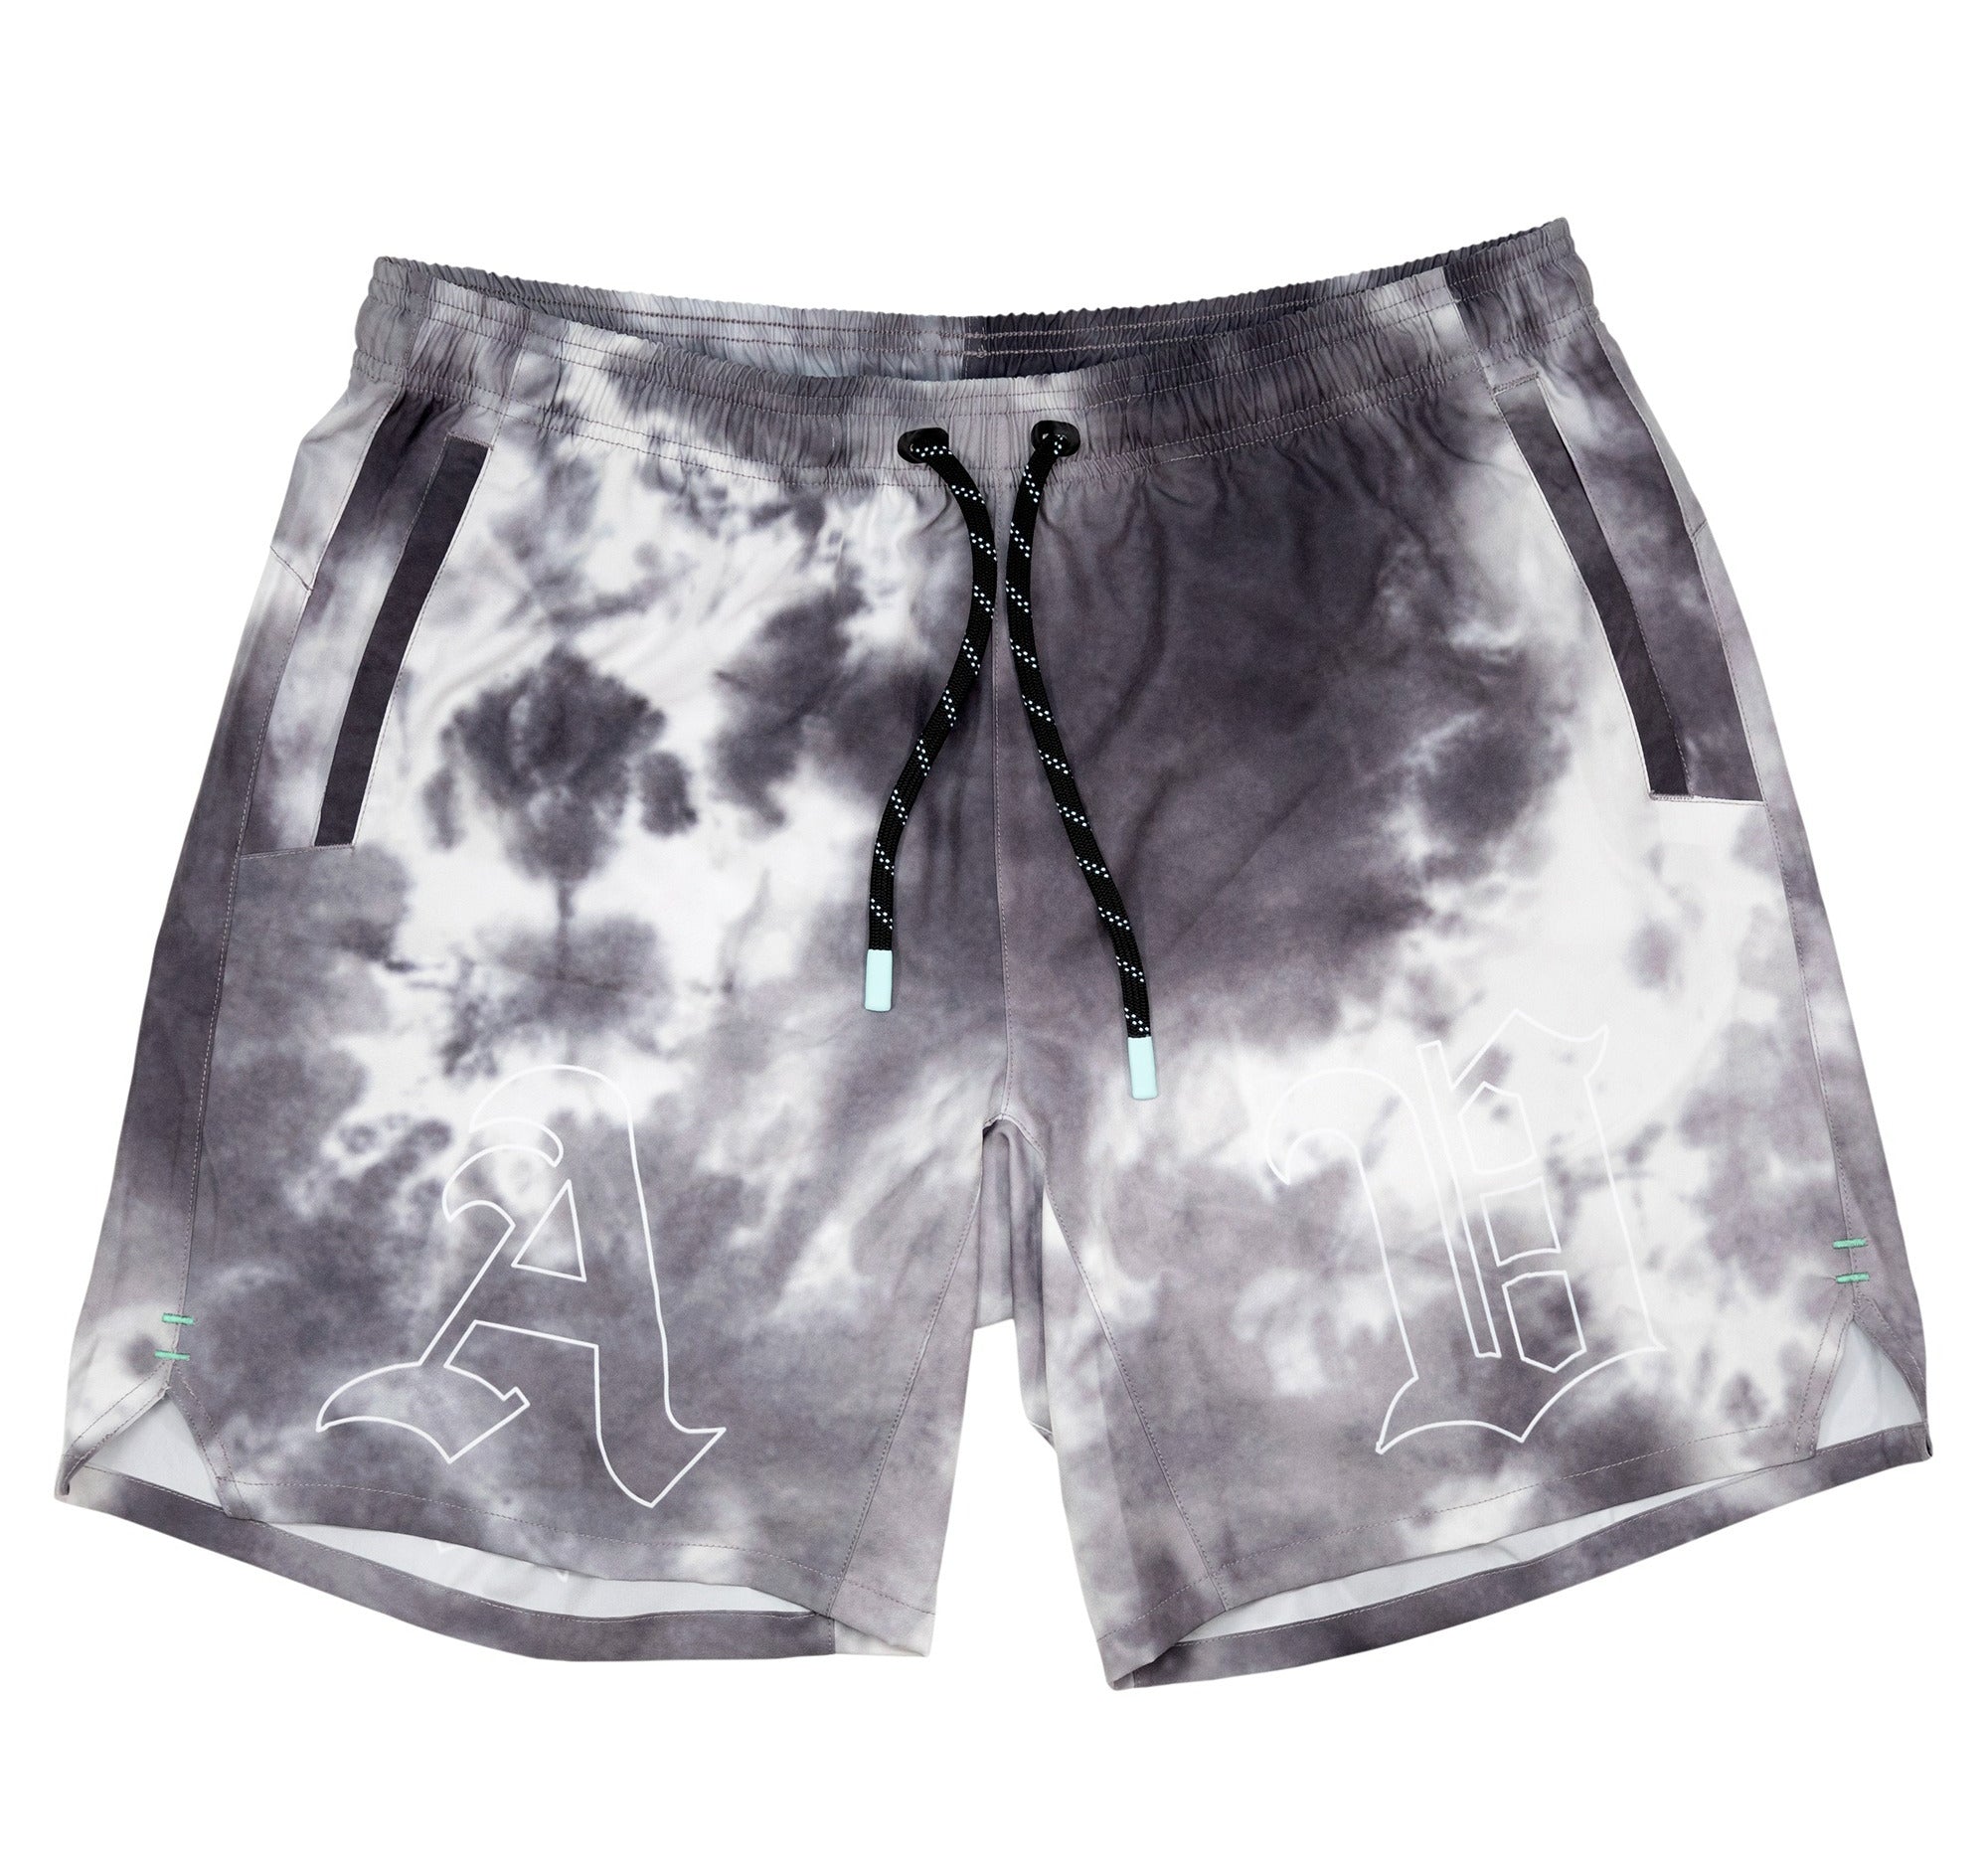 FRONT PRODUCT IMAGE OF SMOKE WATER CLOUD WASH TRAINING SHORTS.